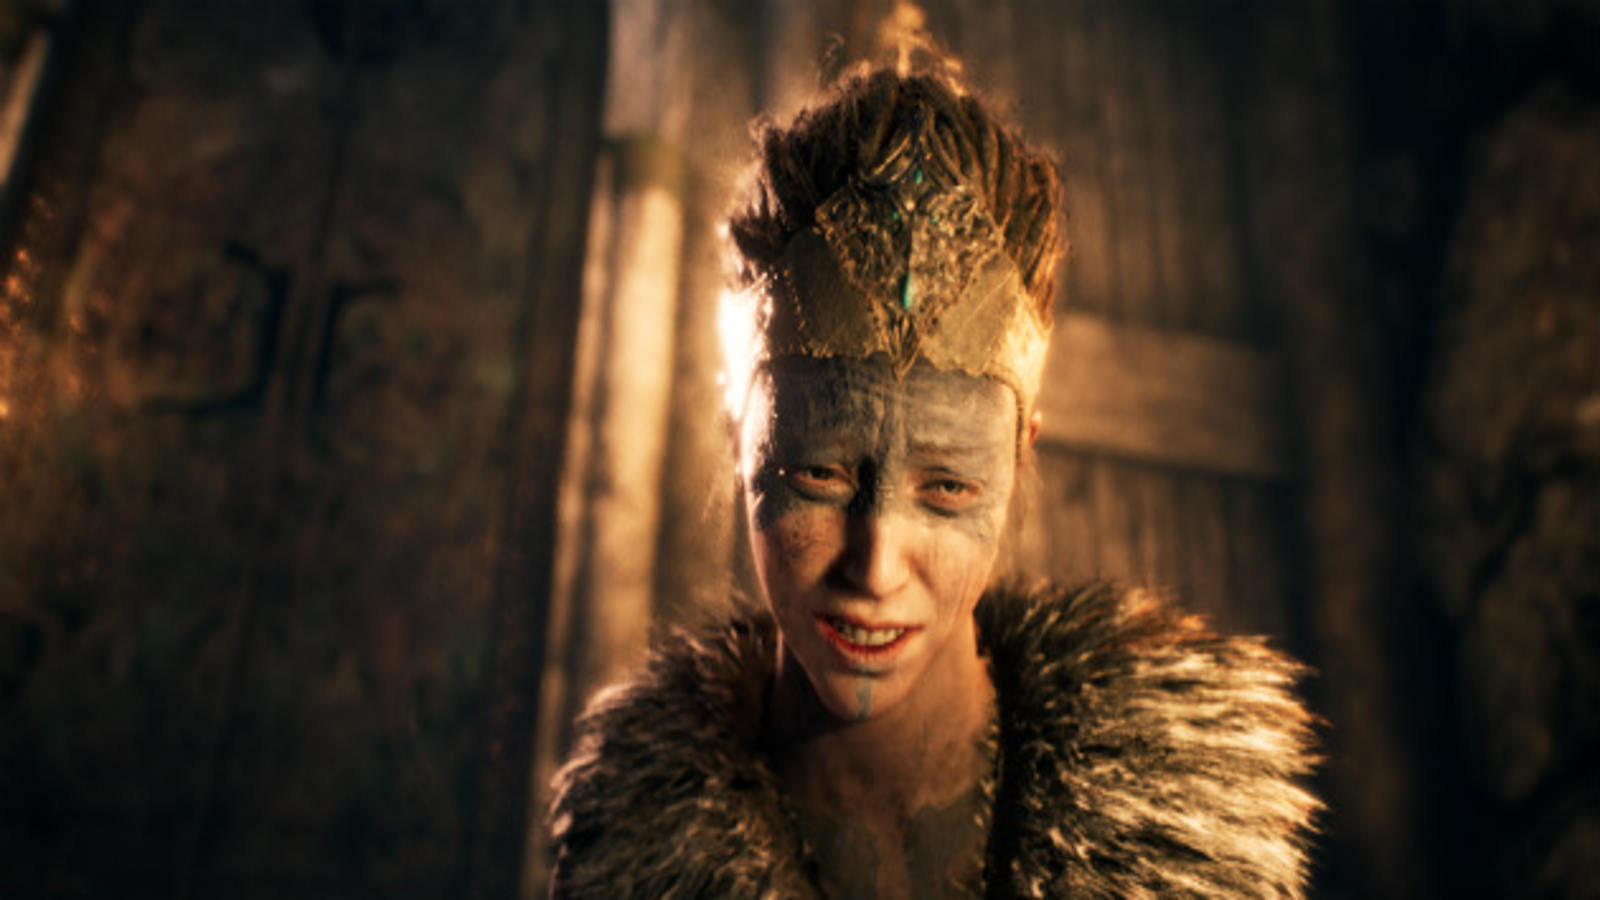 Hellblade: Senua's Sacrifice System Requirements - Can I Run It